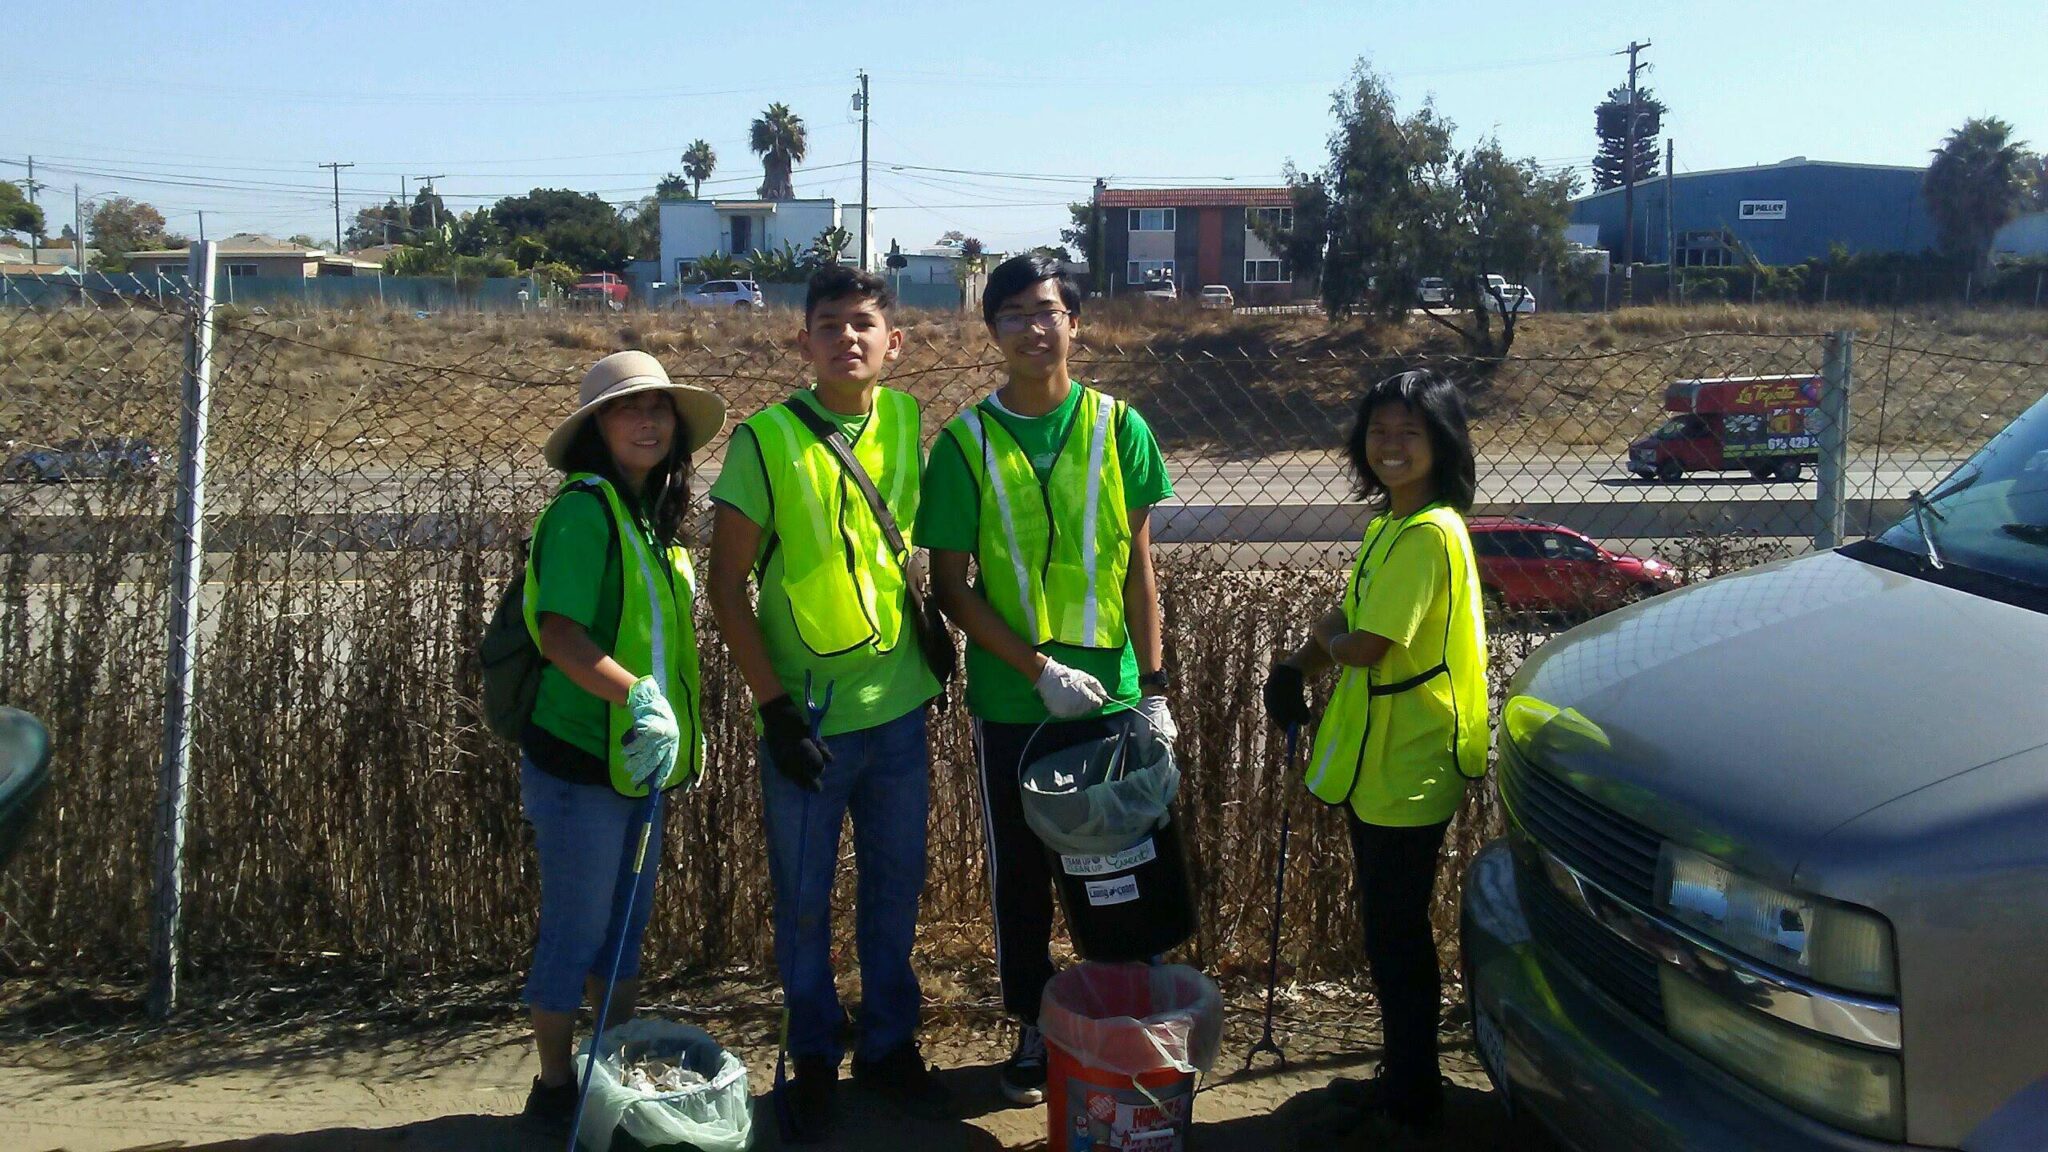 Chula Vista Spring Cleaning Event 3/11/23 I Love A Clean San Diego